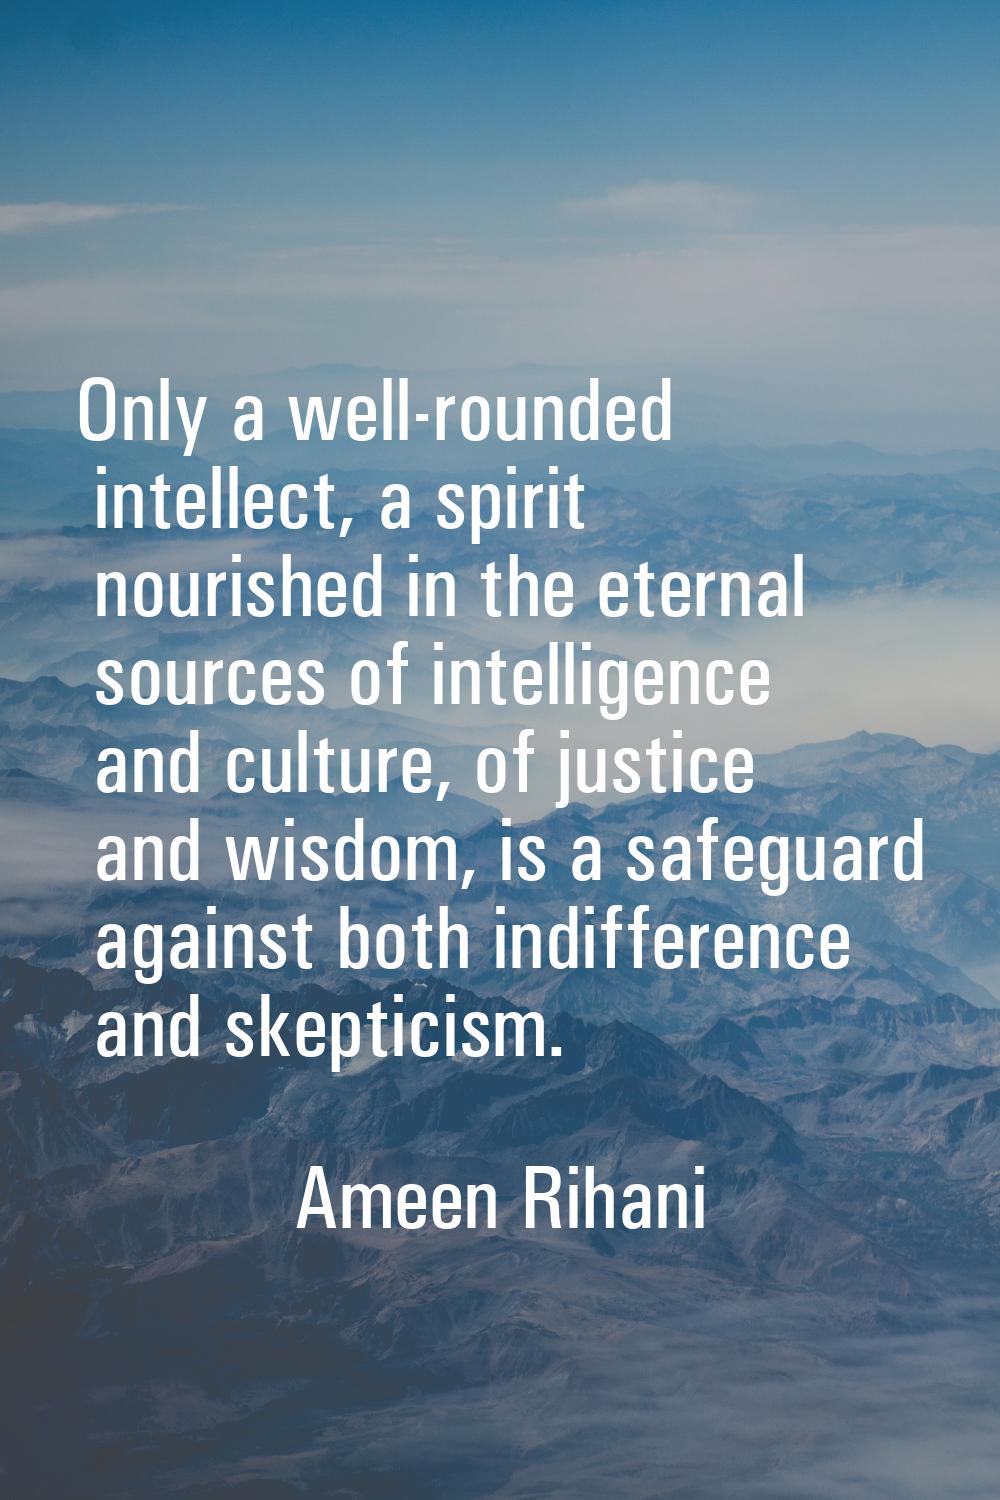 Only a well-rounded intellect, a spirit nourished in the eternal sources of intelligence and cultur